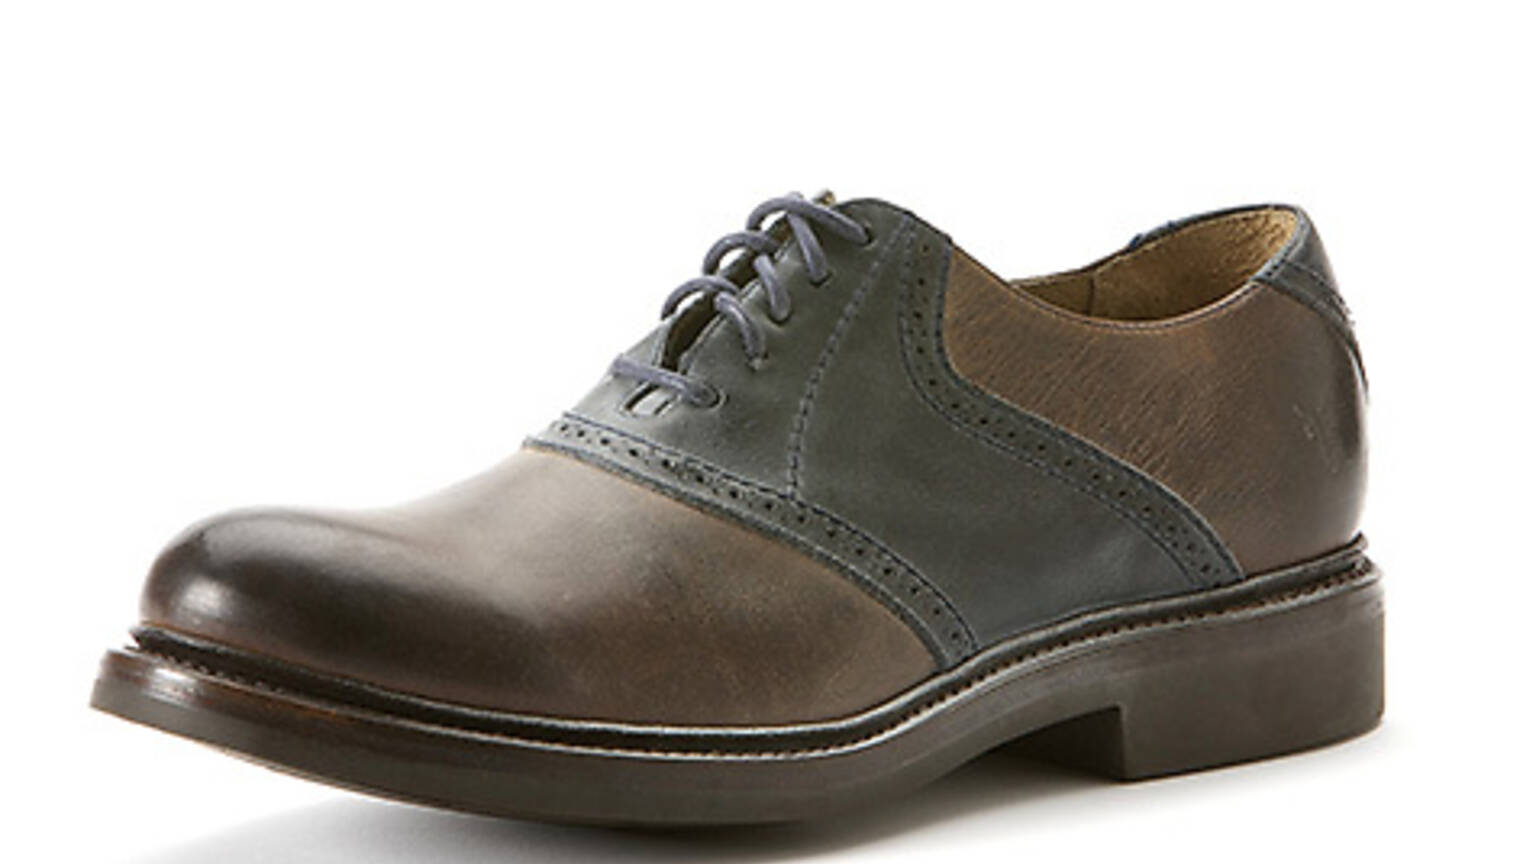 Top shoes for men fall 2012: Sneakers, boots, dress shoes and more